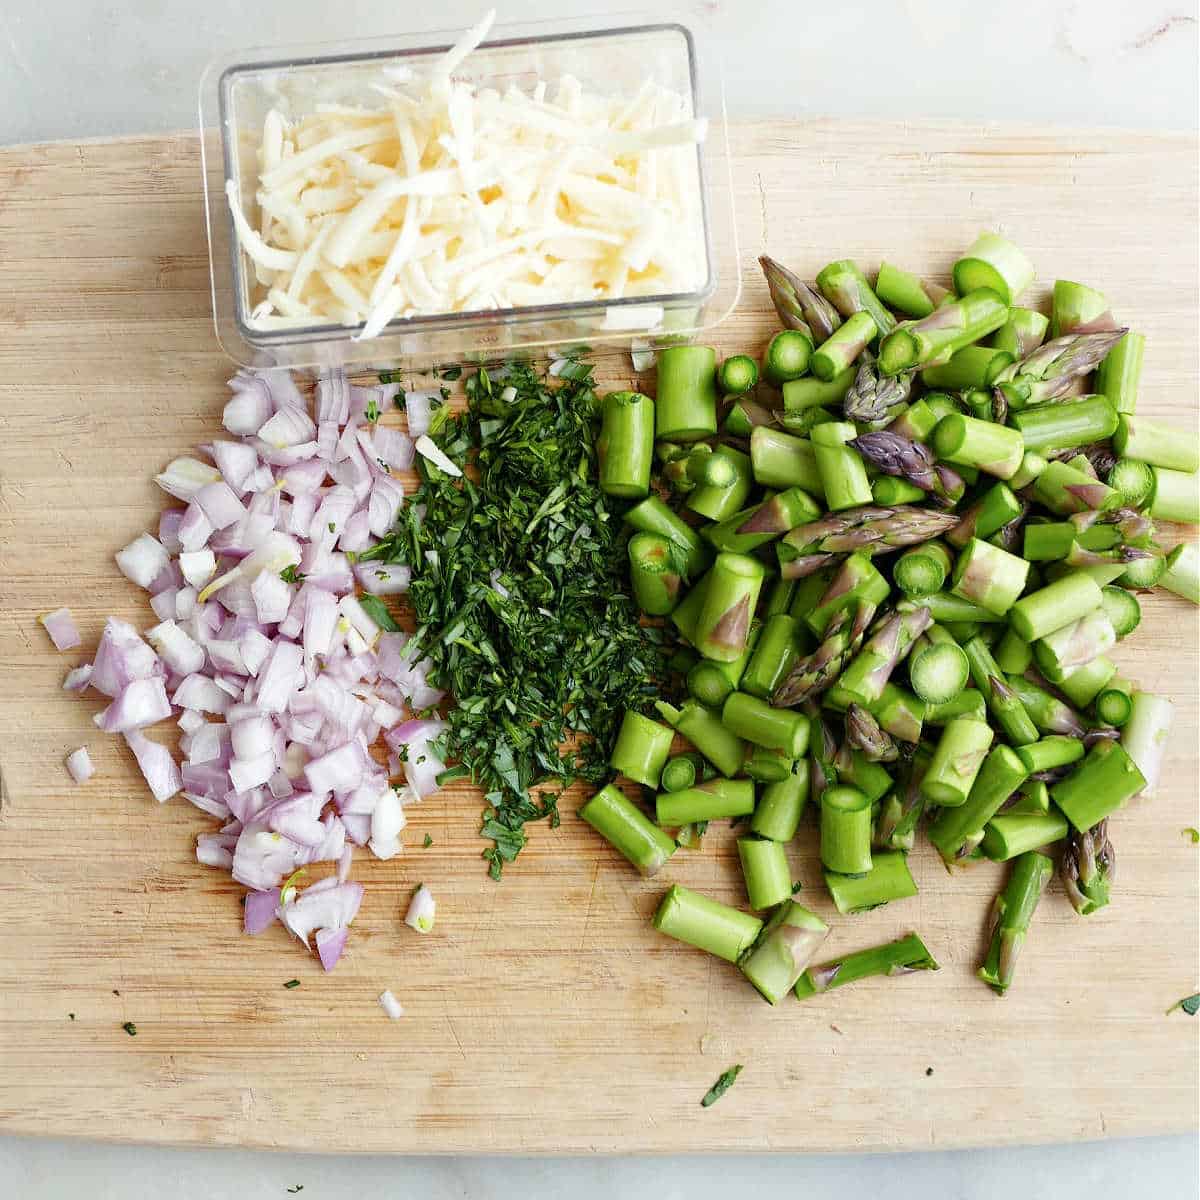 diced shallot, tarragon, and asparagus on a cutting board next to grated cheese